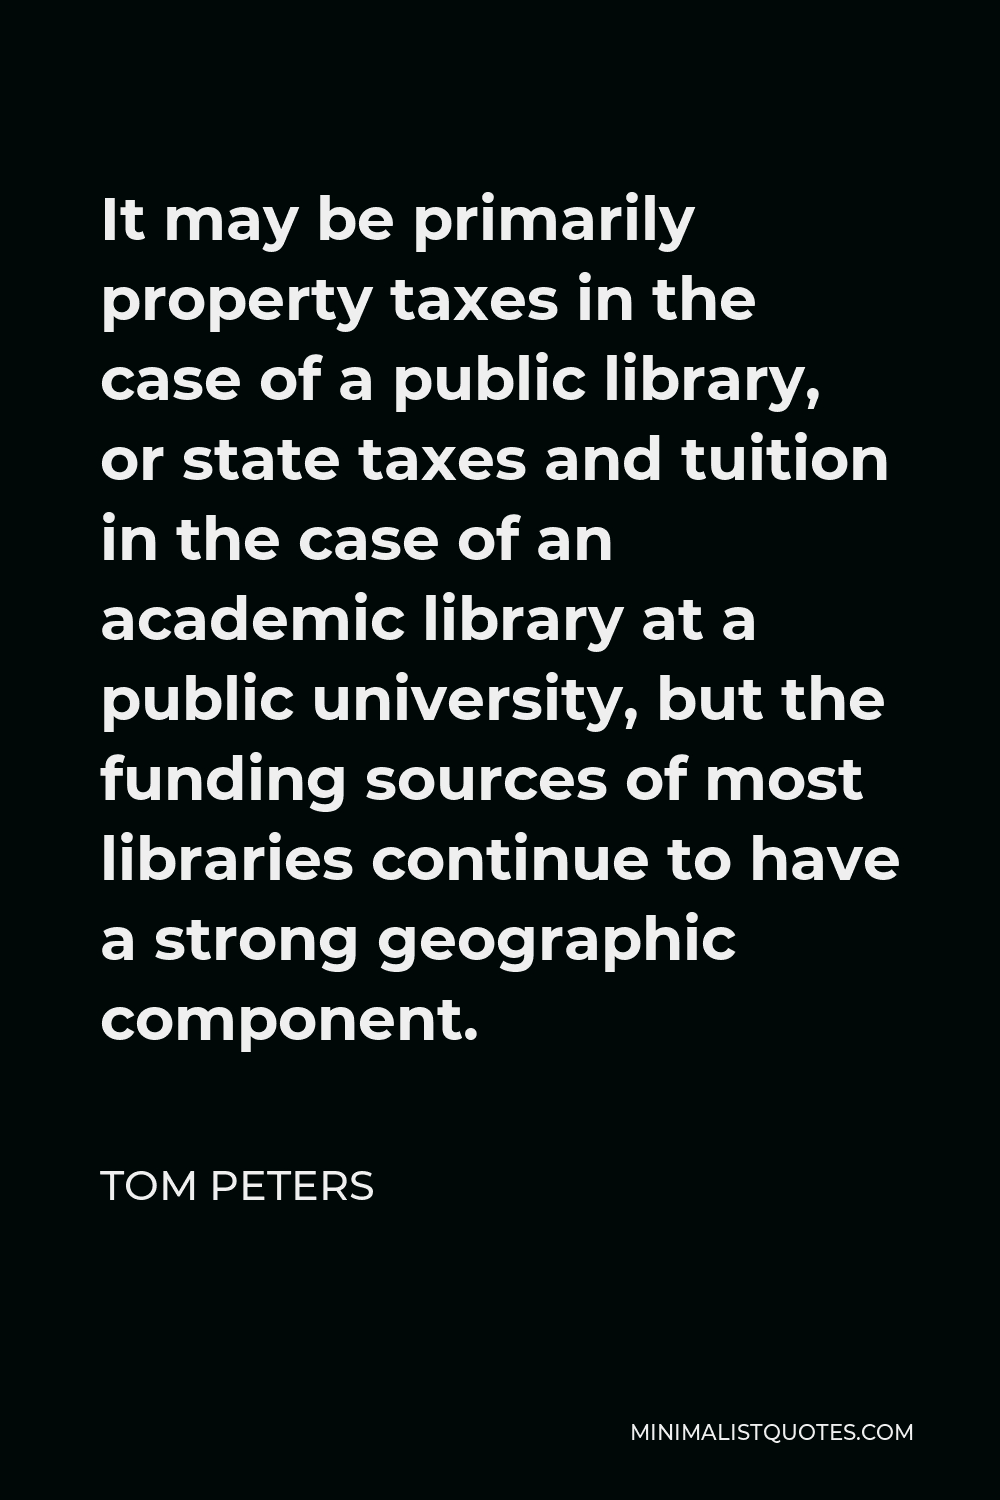 Tom Peters Quote - It may be primarily property taxes in the case of a public library, or state taxes and tuition in the case of an academic library at a public university, but the funding sources of most libraries continue to have a strong geographic component.